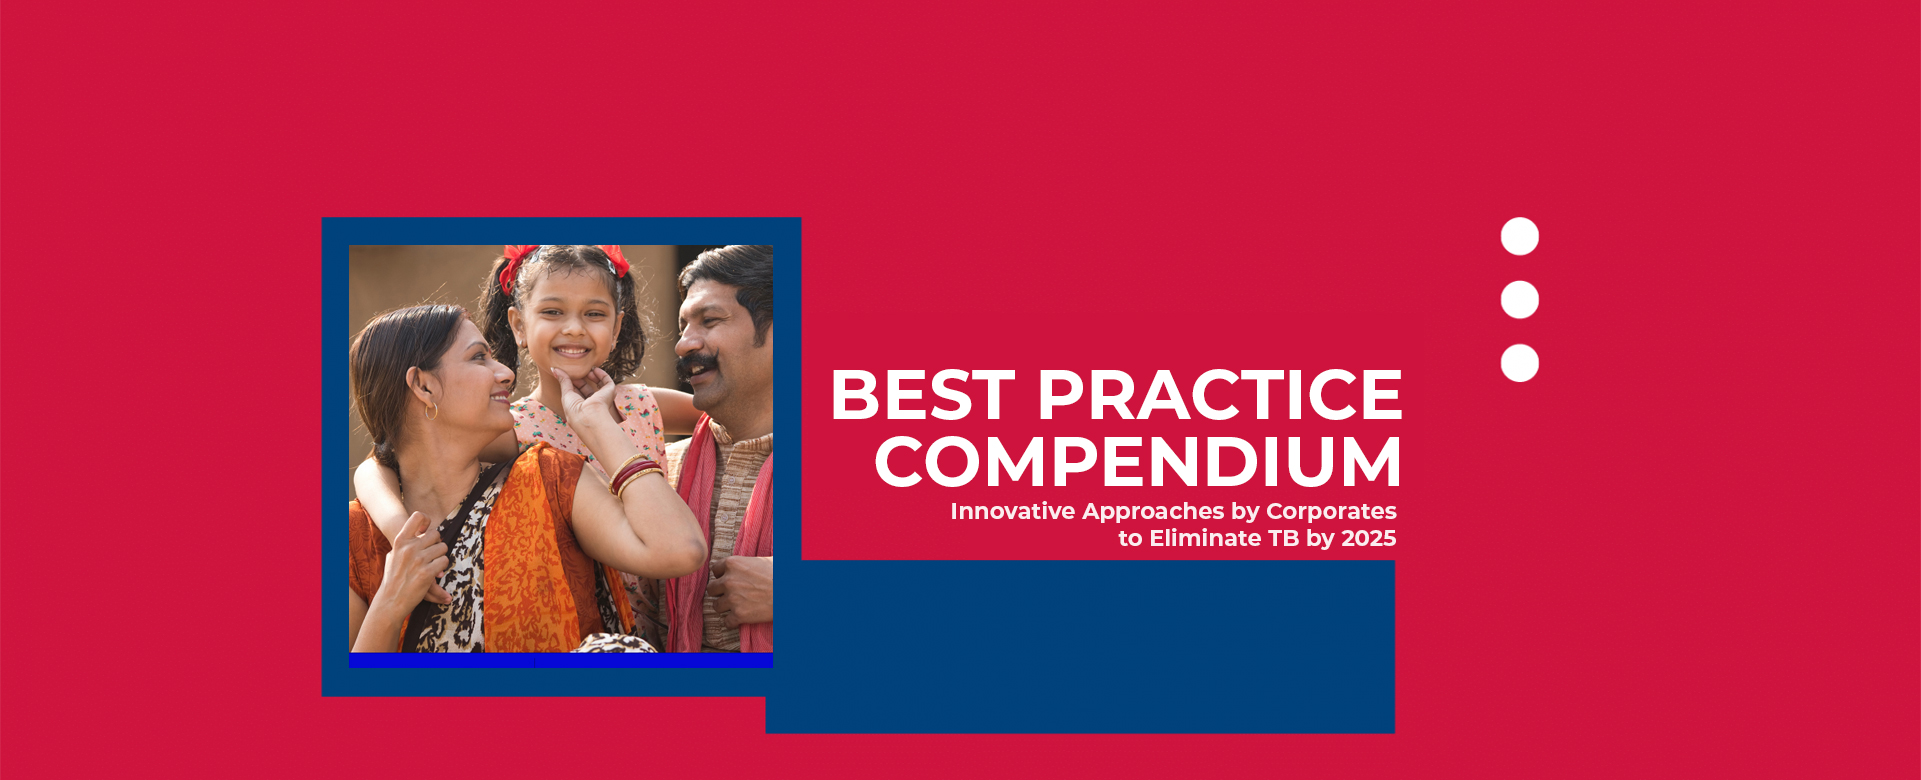 Best Practice Compendium: Innovative Approaches by Corporates  to Eliminate TB by 2025